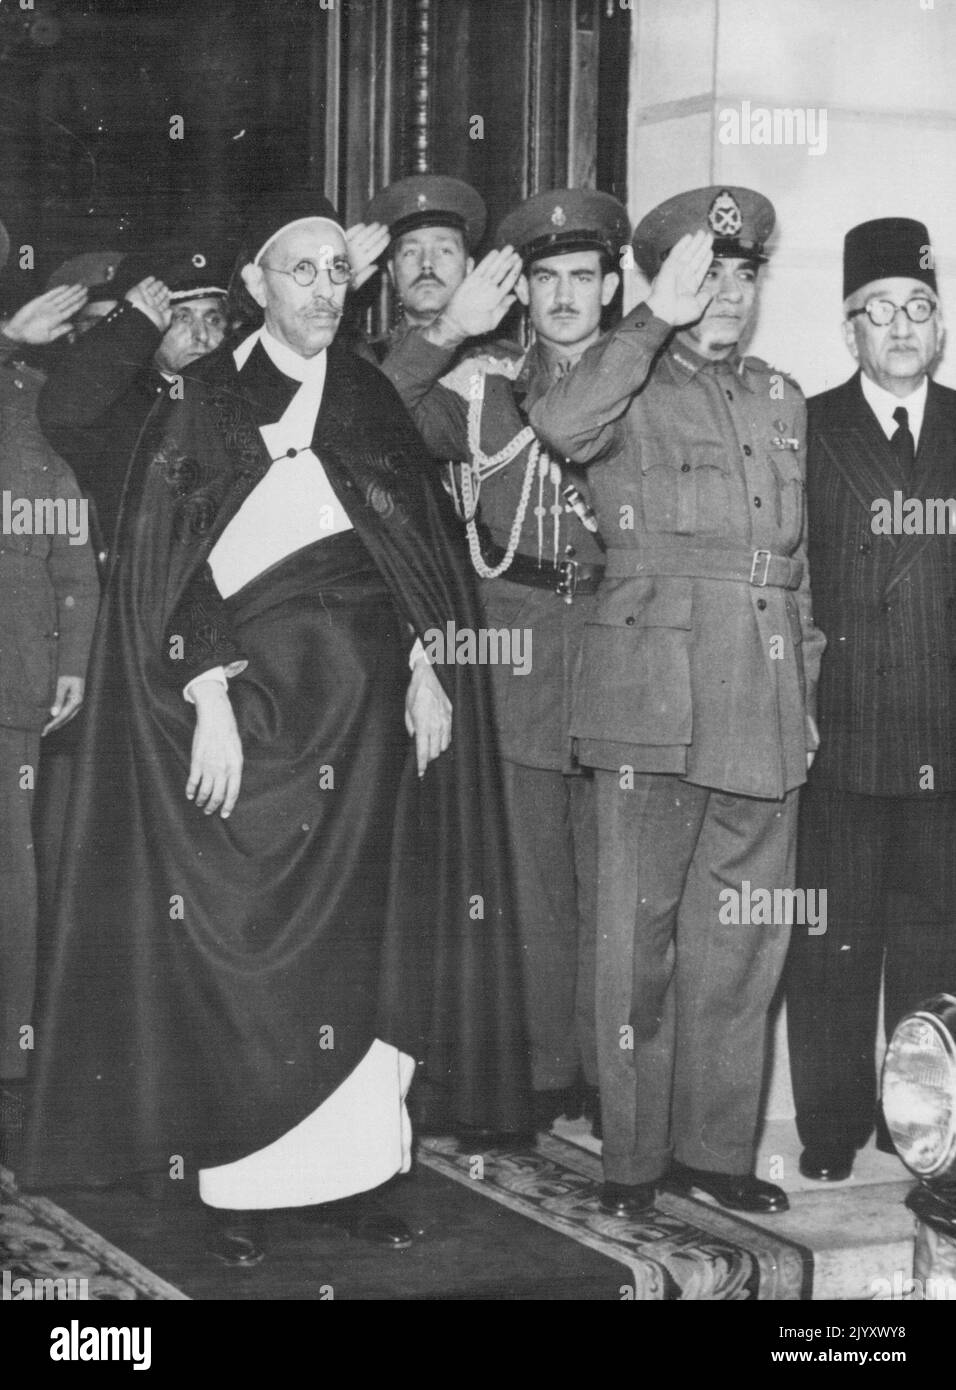 King Idris In Cairo King Idris El Senussi (left), listening to the band playing the Libyan National anthem on his arrival in Cairo, December 2. Let to right, are: King Idriss el Senussi; Prince Ambdel Moneim, The Prince Regent and Premier Mayor General Mohamed Naguib, Person at Extreme right in picture no identified. King Idris Ei Senussi, First Moanrch of Libya, arrived in Cairo December 2 for a week-long state visit. The monarch who travelled from Benghazi Eastwards by car and Rail, was greeted on arrival in Cairo railway station by Egypt's Regent Prince Abdel Moneim' Premier Major general M Stock Photo